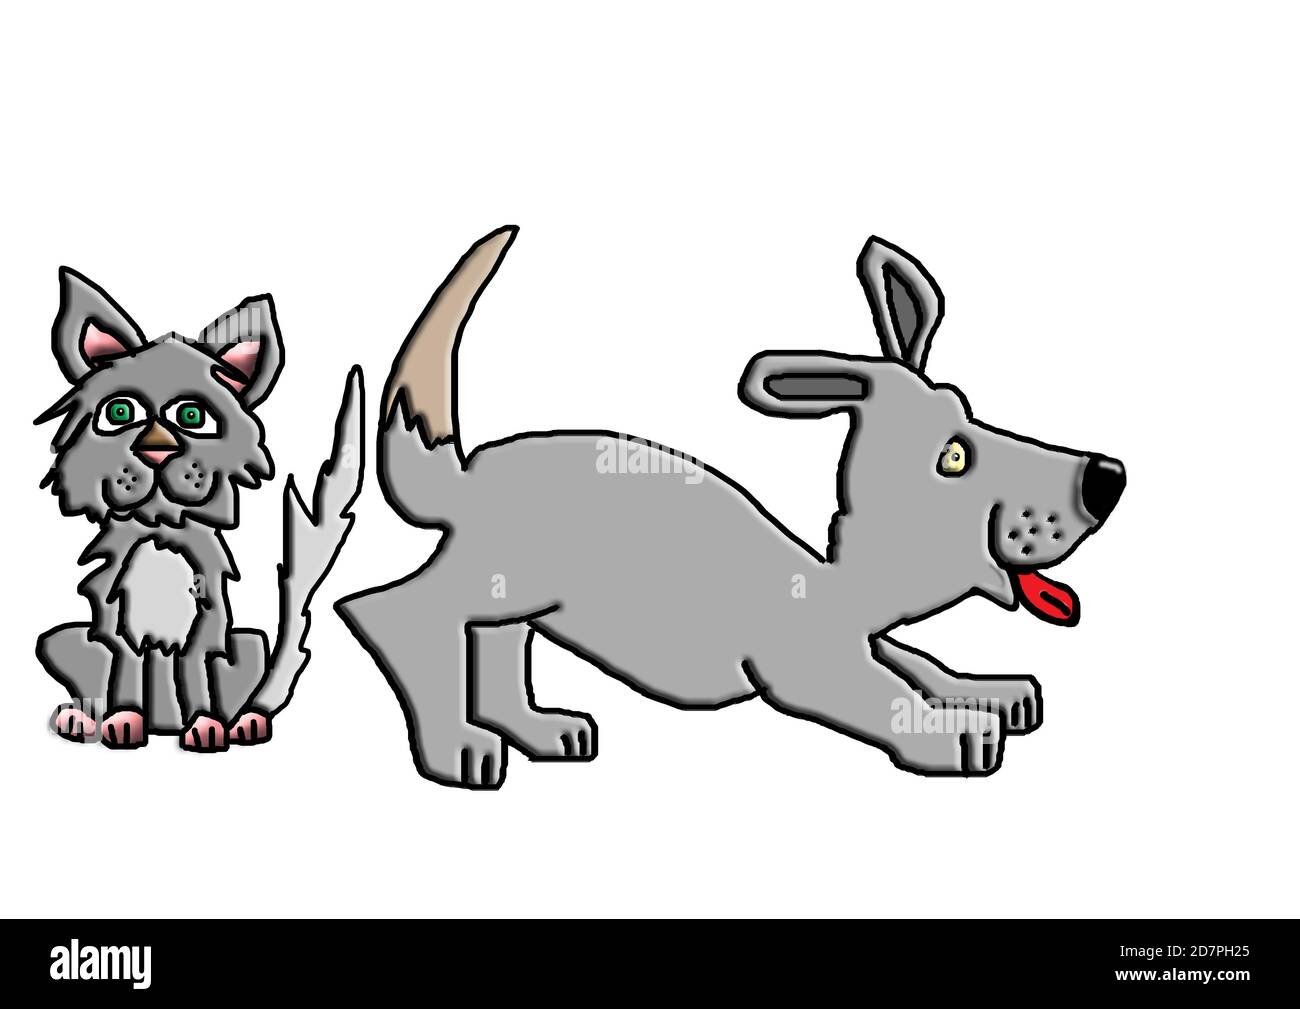 Cartoon illustration a cat and a dog with digital effects artwork in landscape format cat sitting up dog with pounce pose wagging tail and tongue out Stock Photo